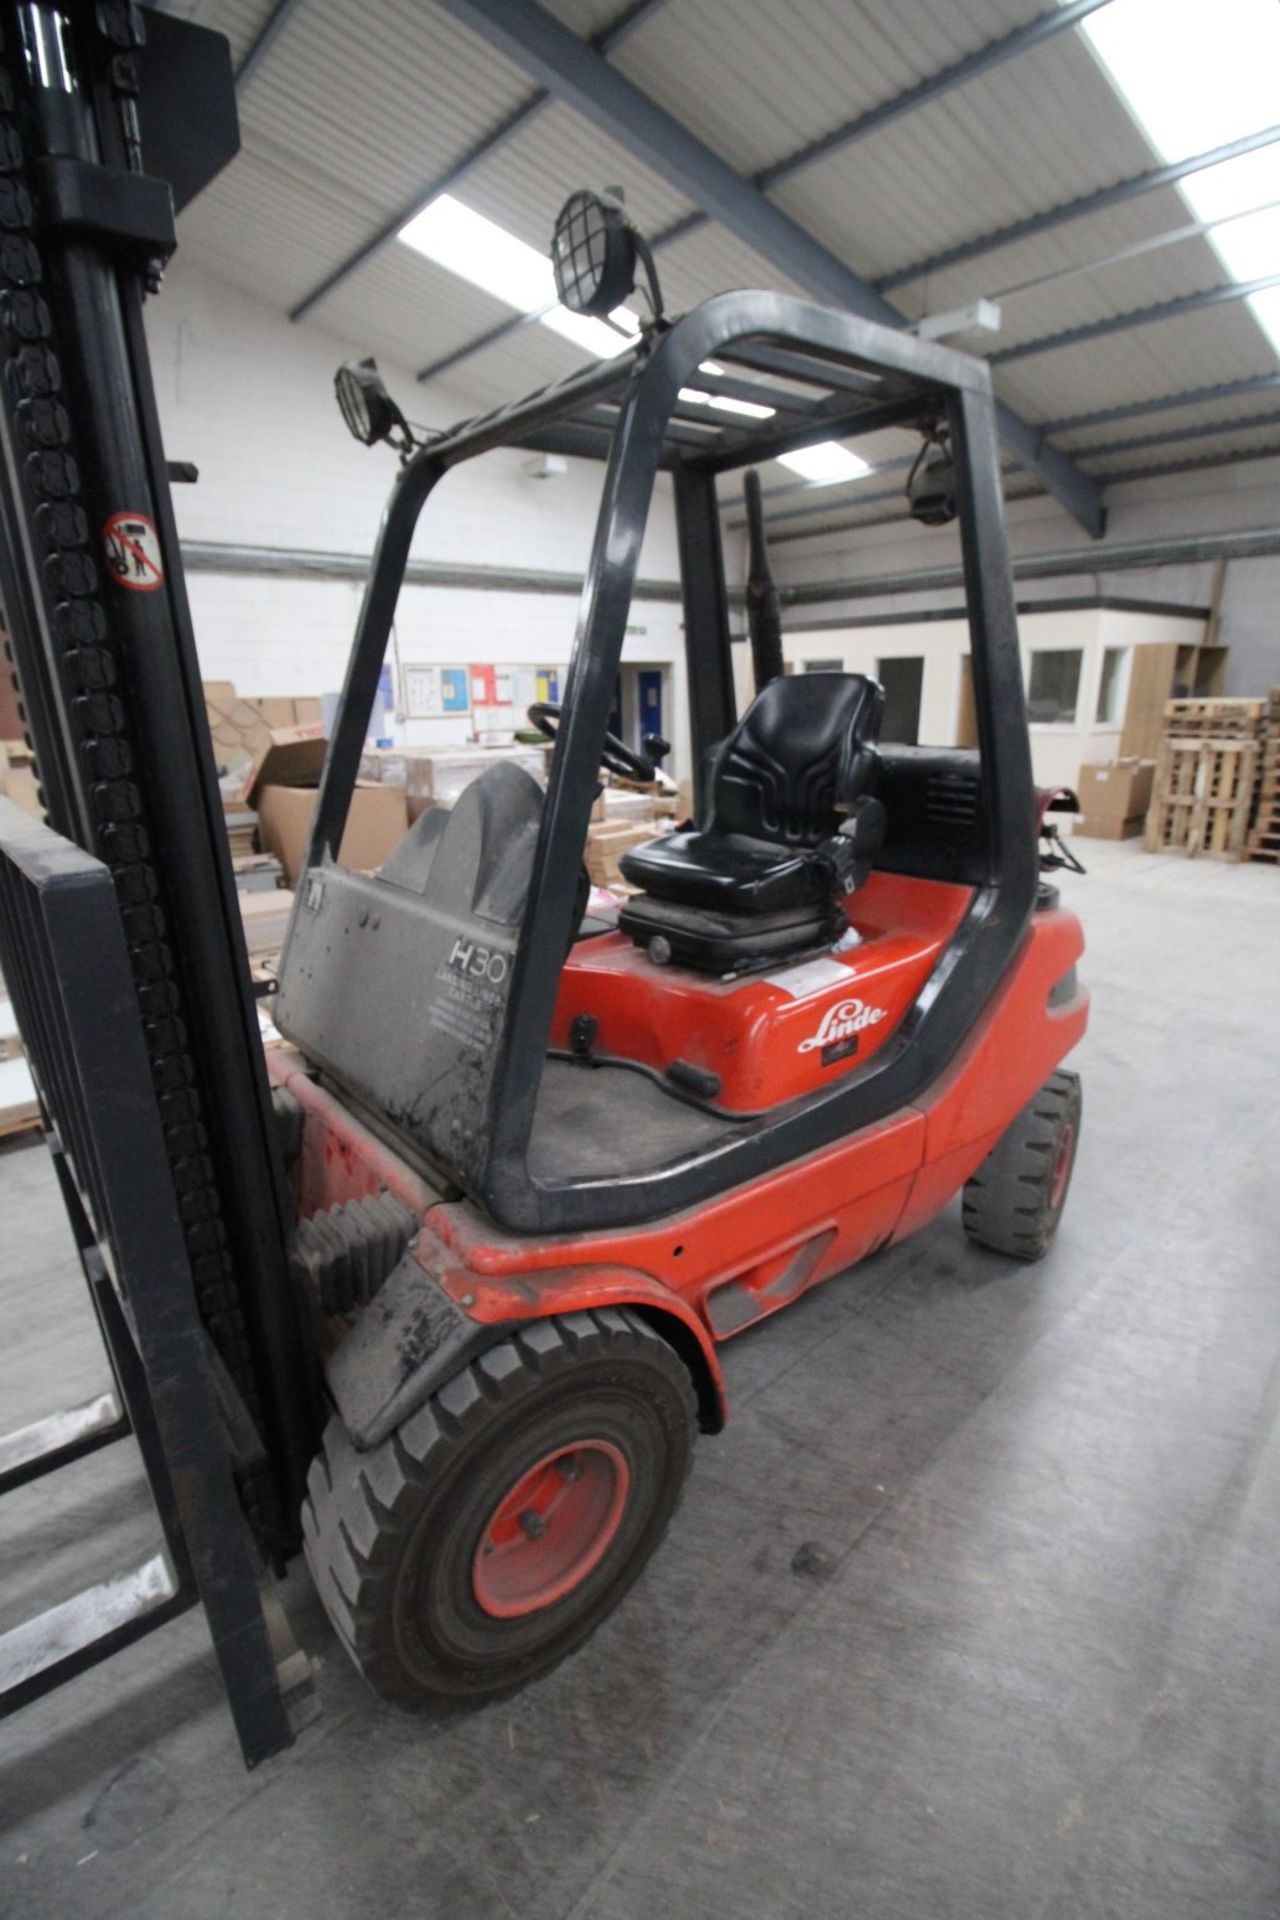 LINDE H30 GAS FIRED 3-TONNE CAPACITY FORKLIFT, 1664 RECORDED HOURS ON CLOCK, SERIAL NO. - Image 5 of 6